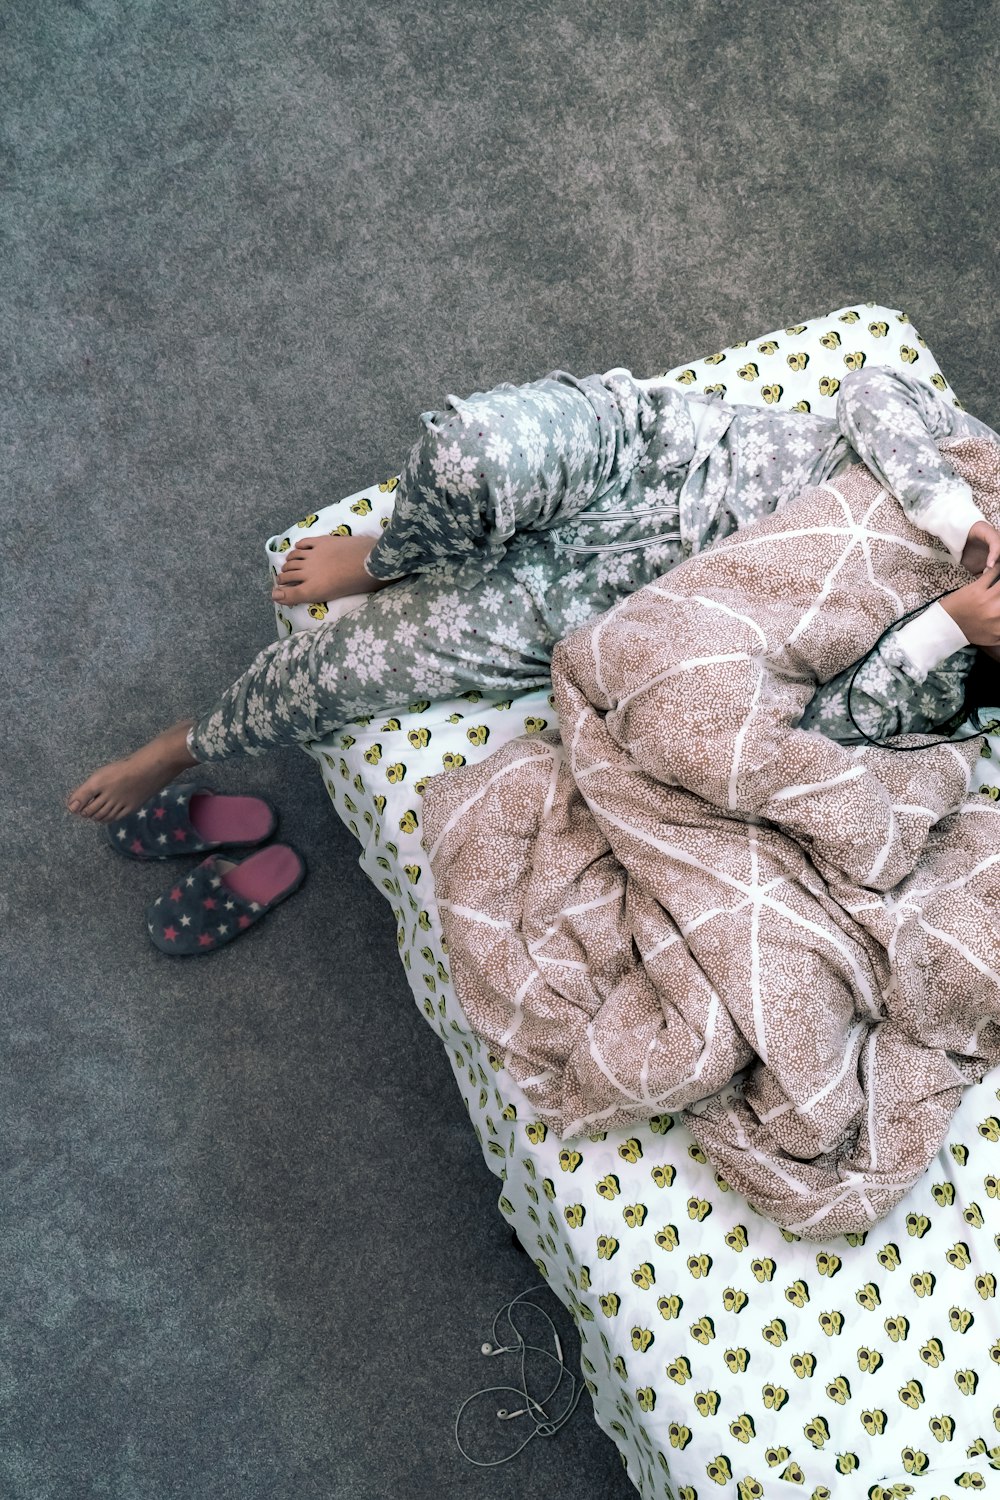 person lying in bed with gray blanket